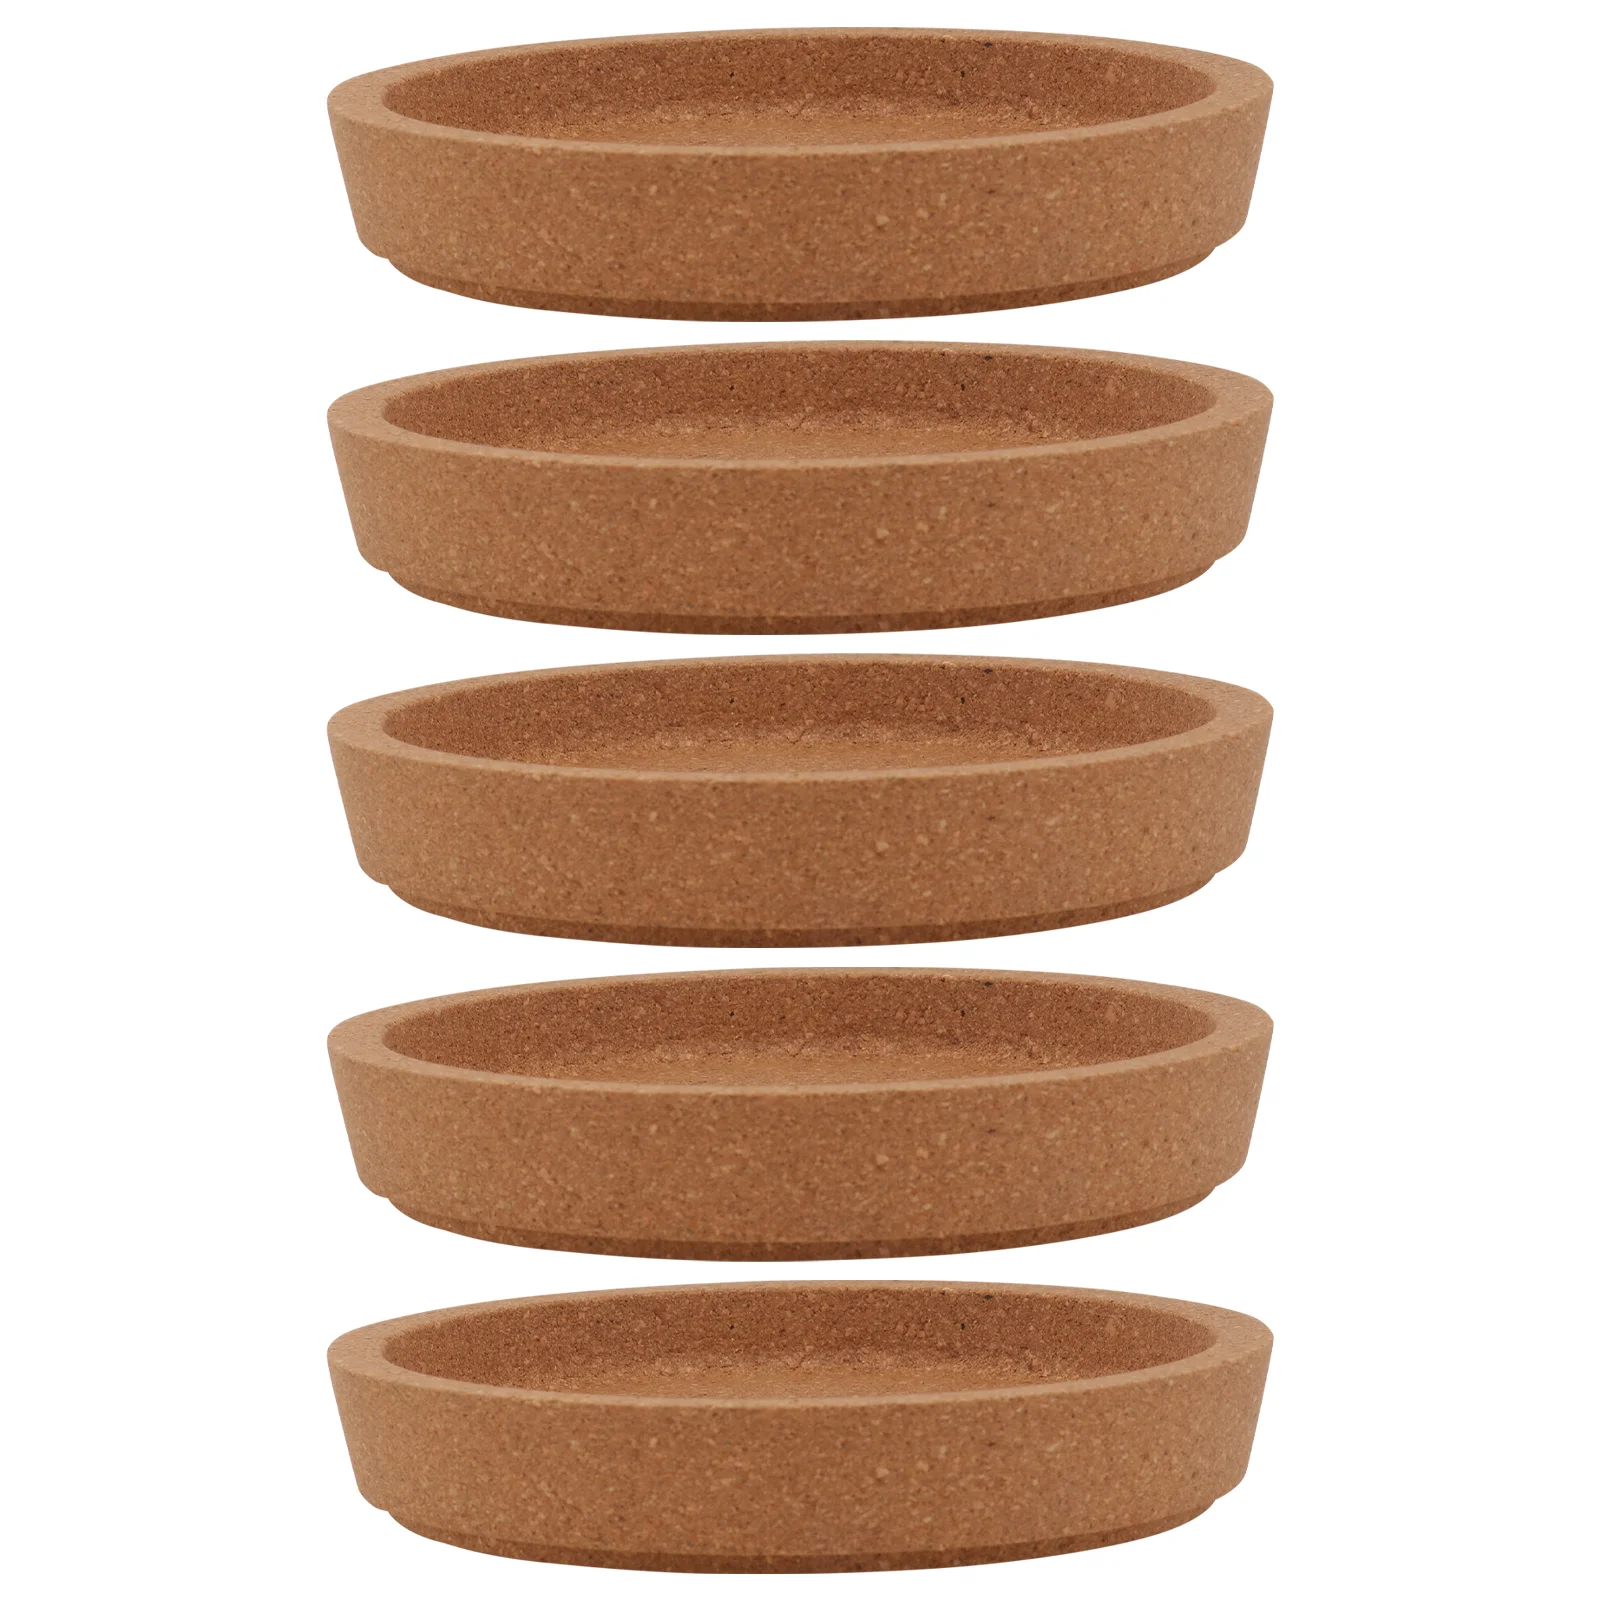 

5 Pcs Drinking Coaster Coffee Coasters Natural Round Coasters Round Wood Coasters Cork Placemats Nordic Rustic Drink Cork